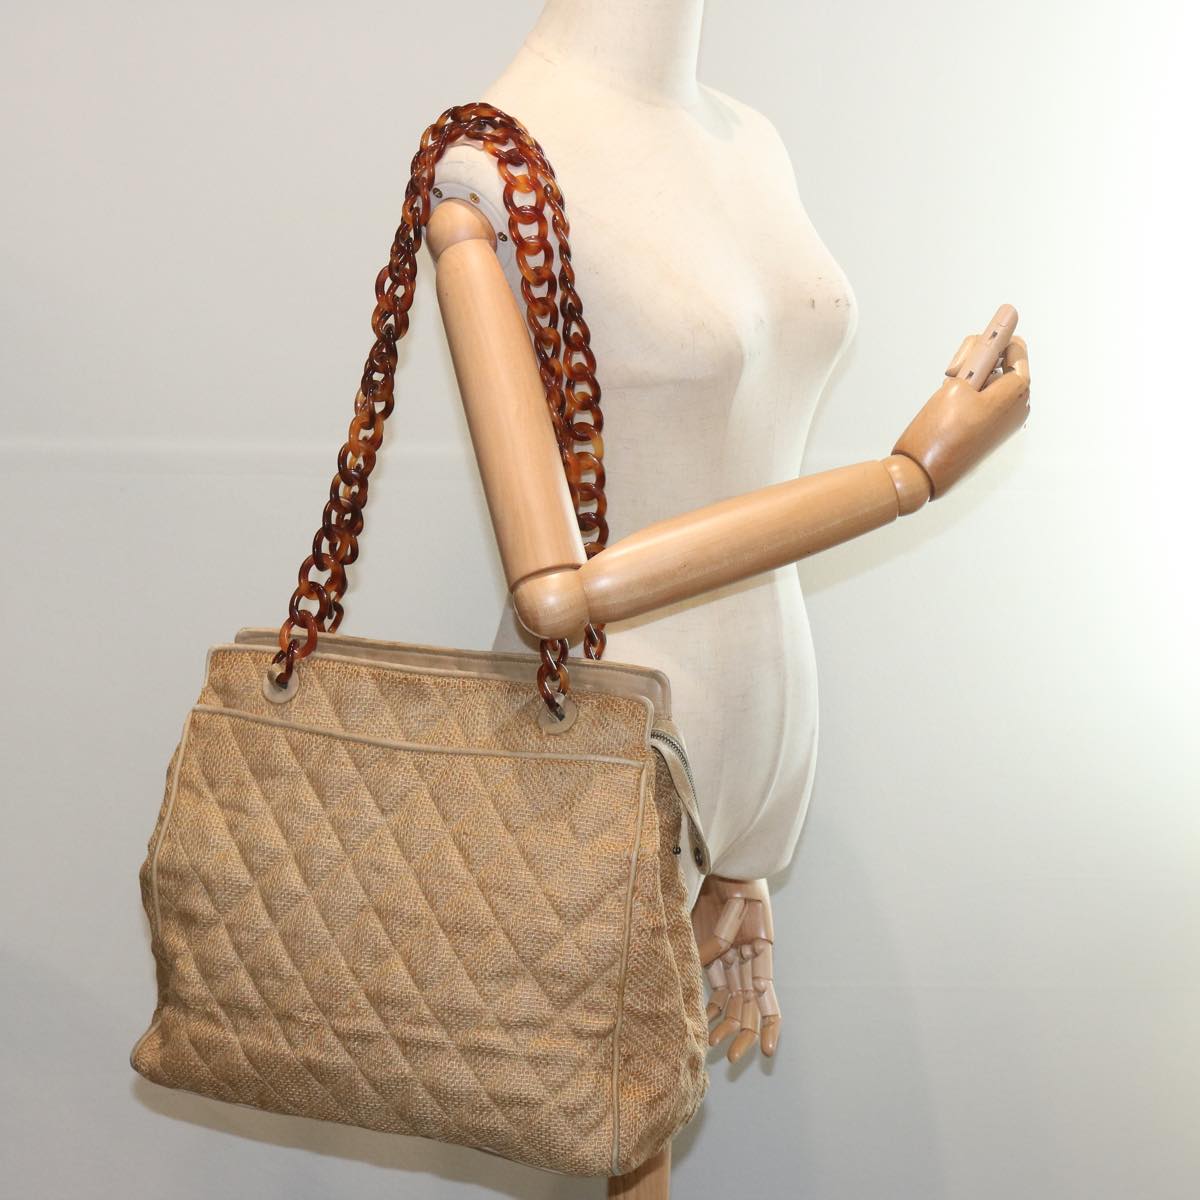 CHANEL Matelasse Tote Bag Straw Brown CC Auth 66963